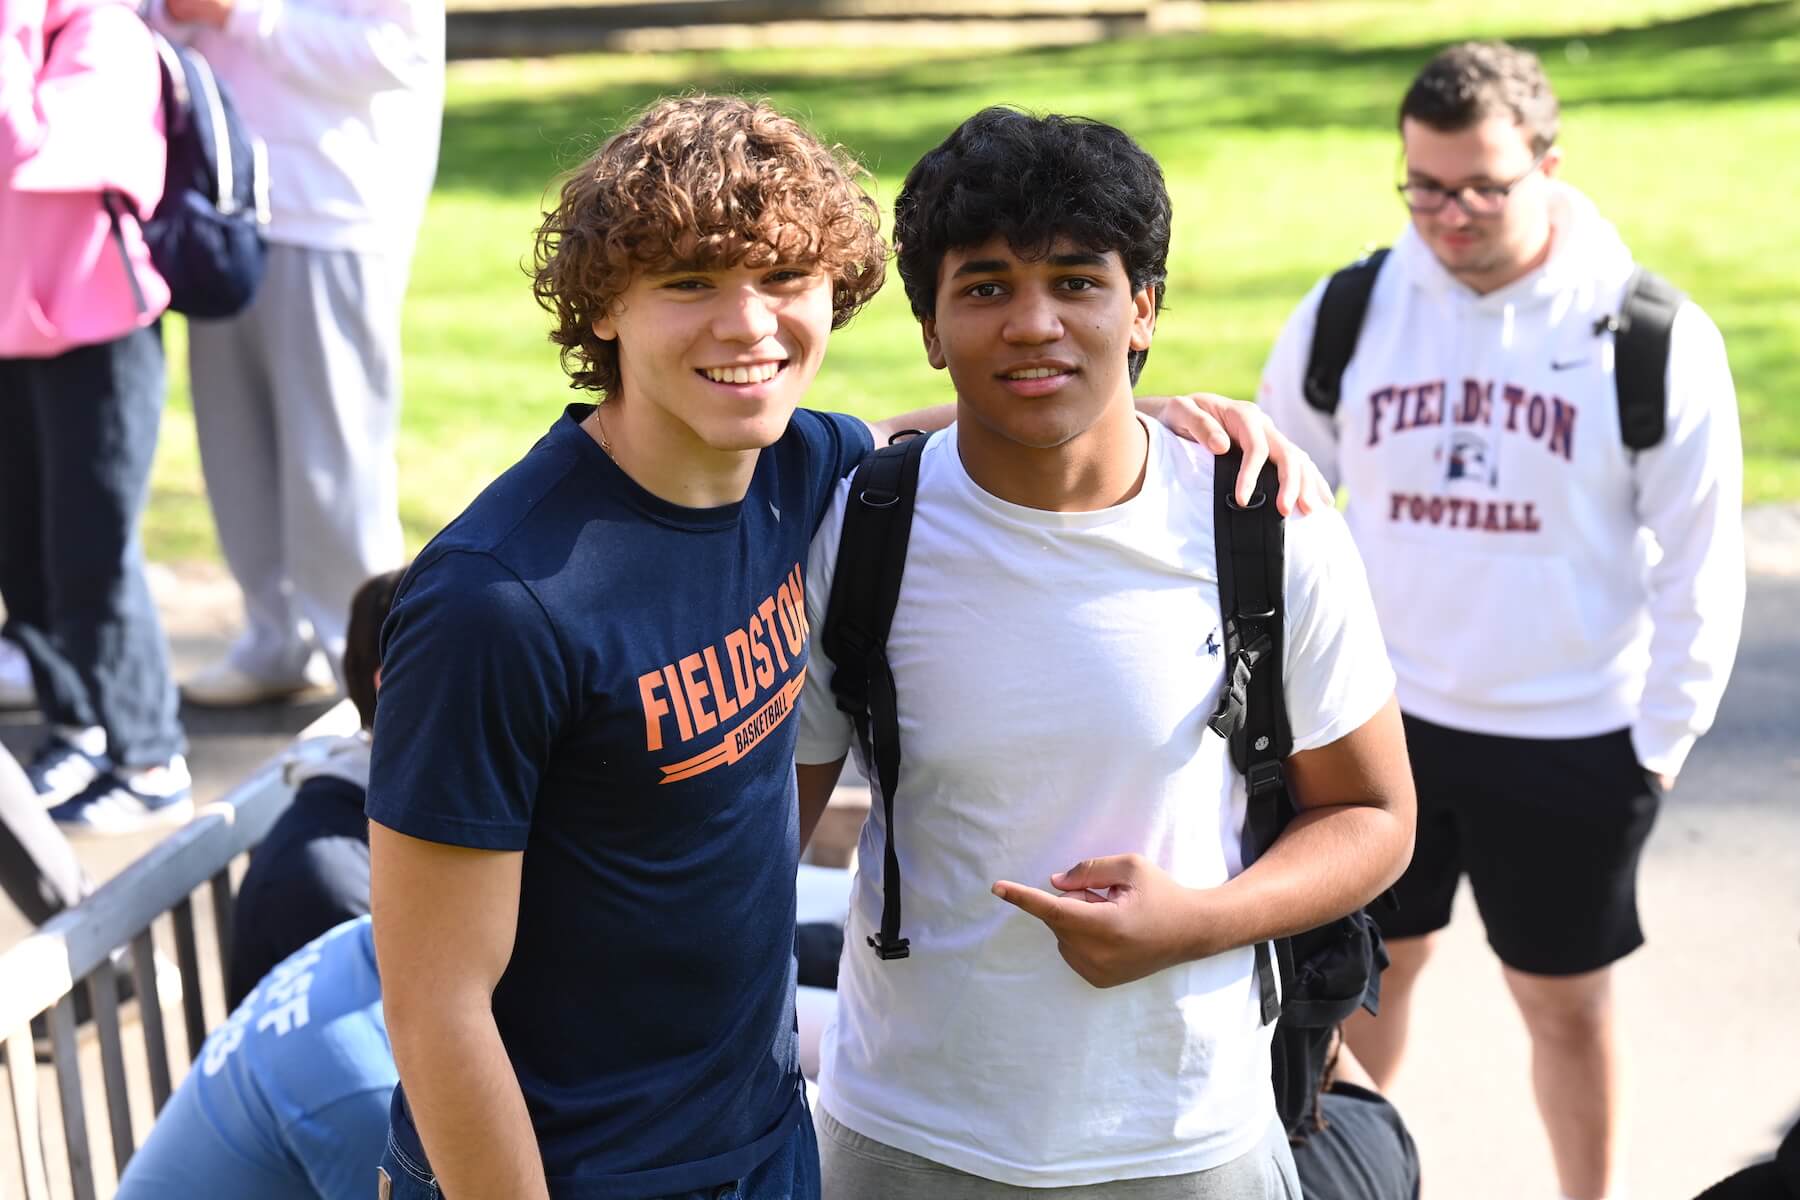 Ethical Culture Fieldston School_Feel Good Photos_Fieldston Upper students smile at camera in the Quad